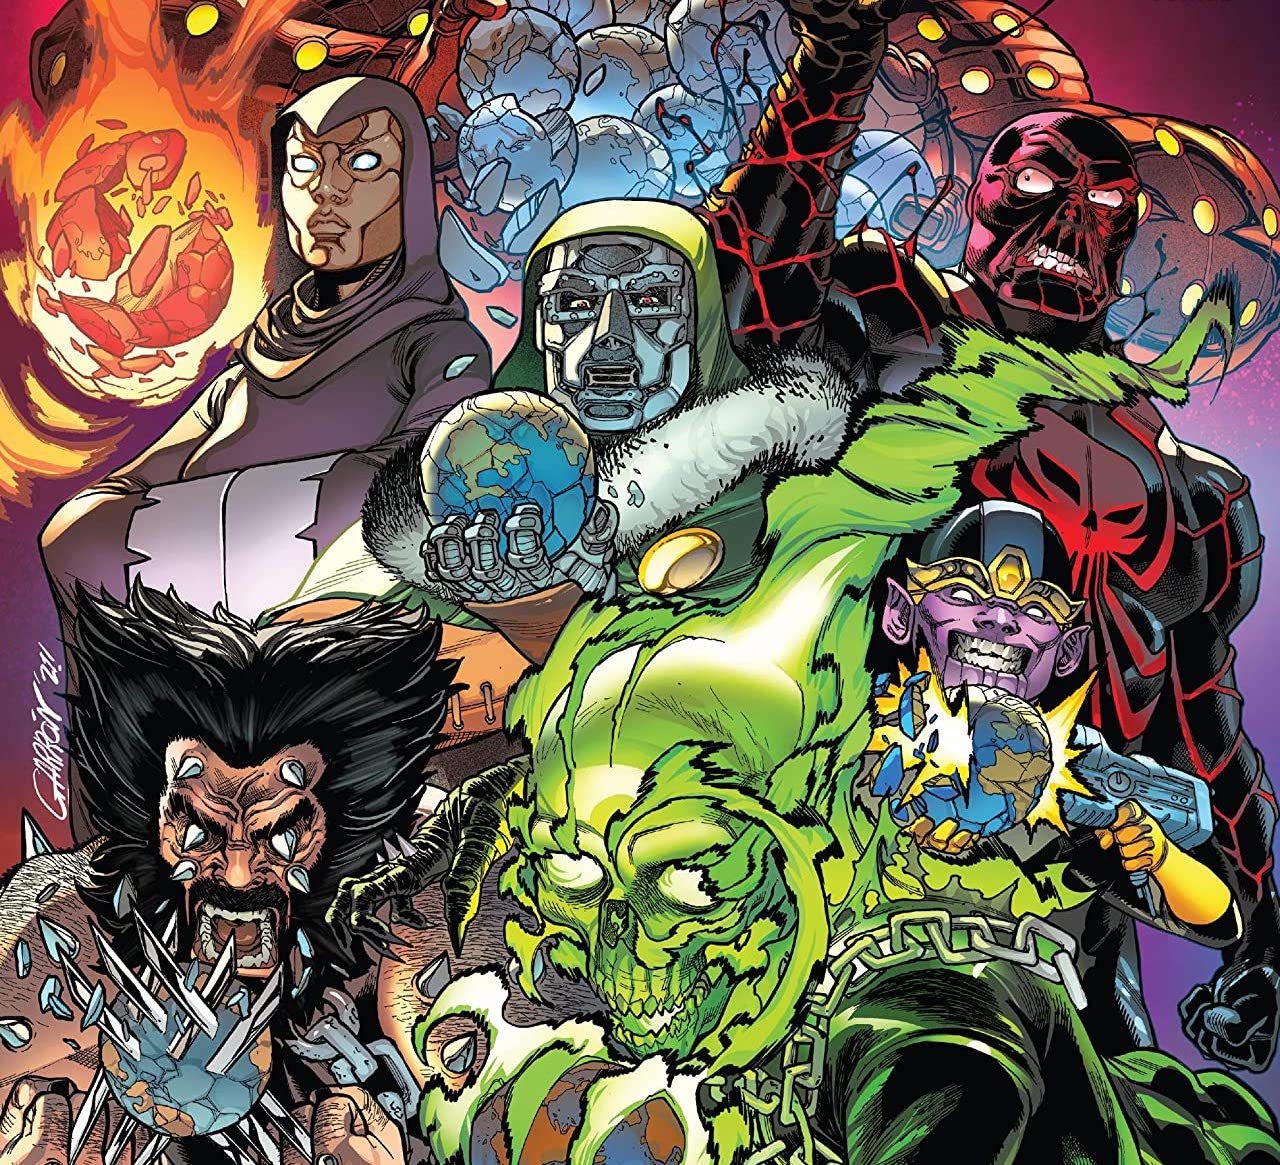 ‘The Avengers’ #52 features new villains, but Starbrand steals the show